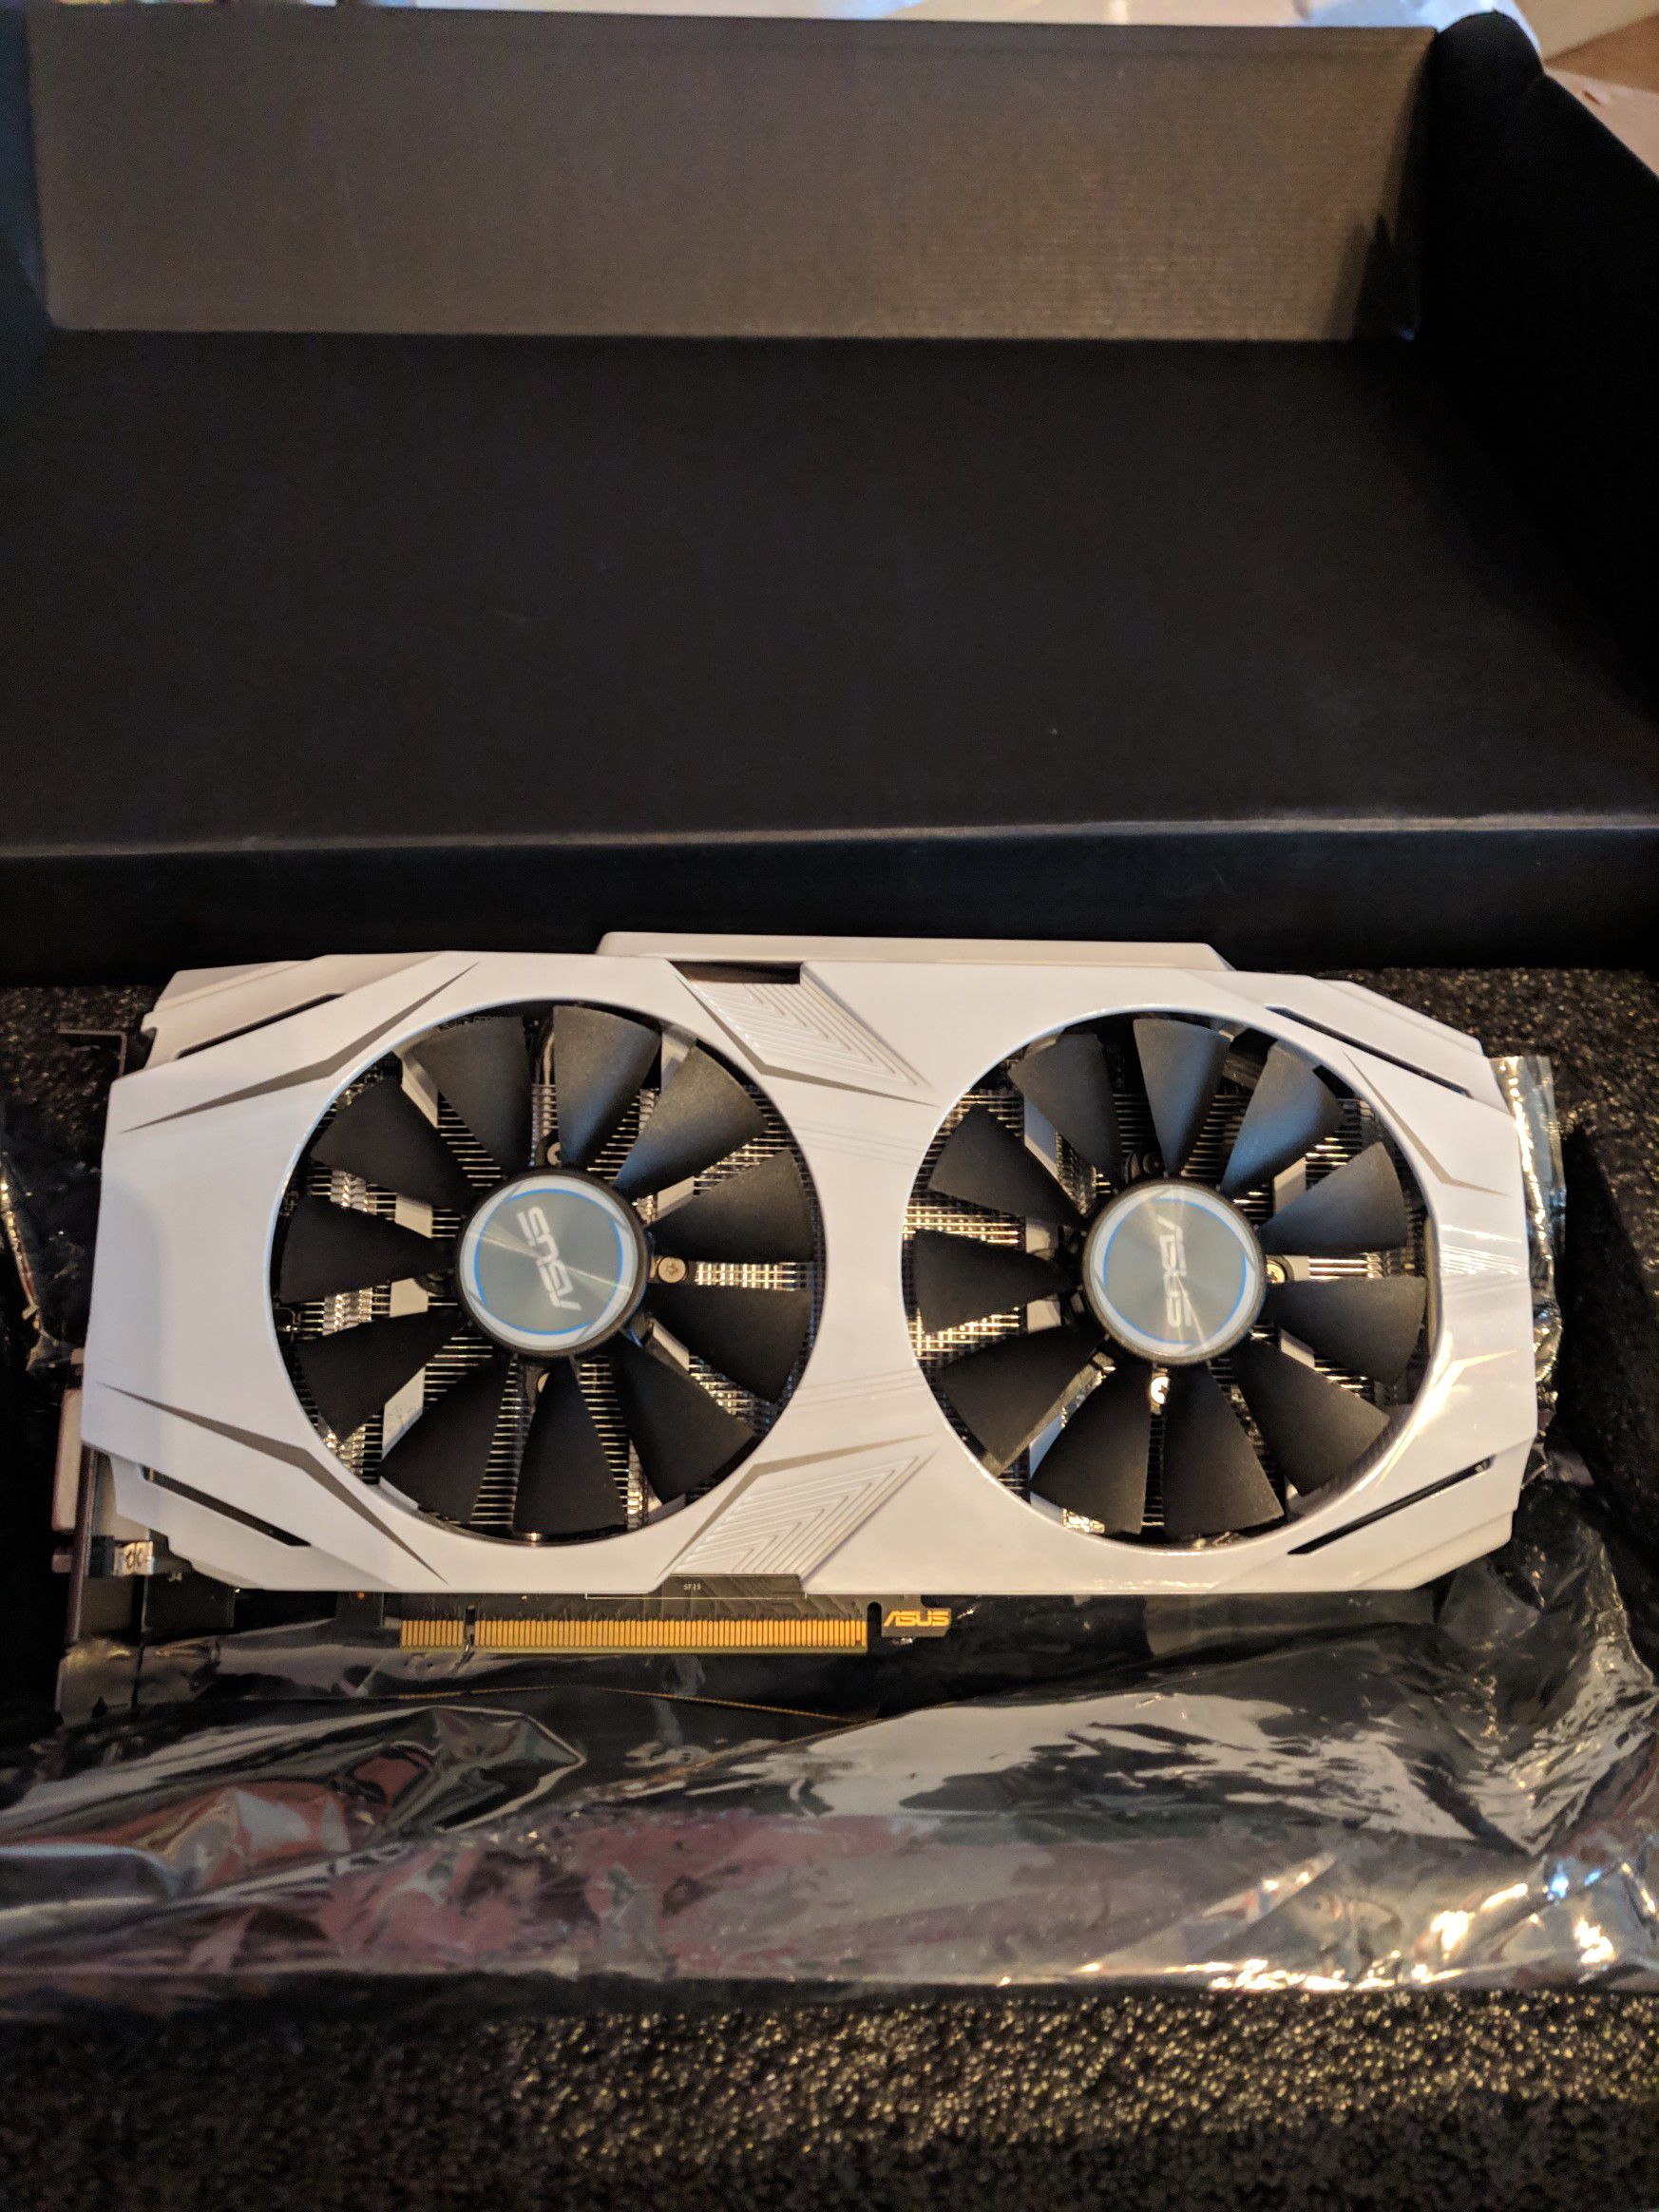 Asus dual 1060 6 gig never mined or OC